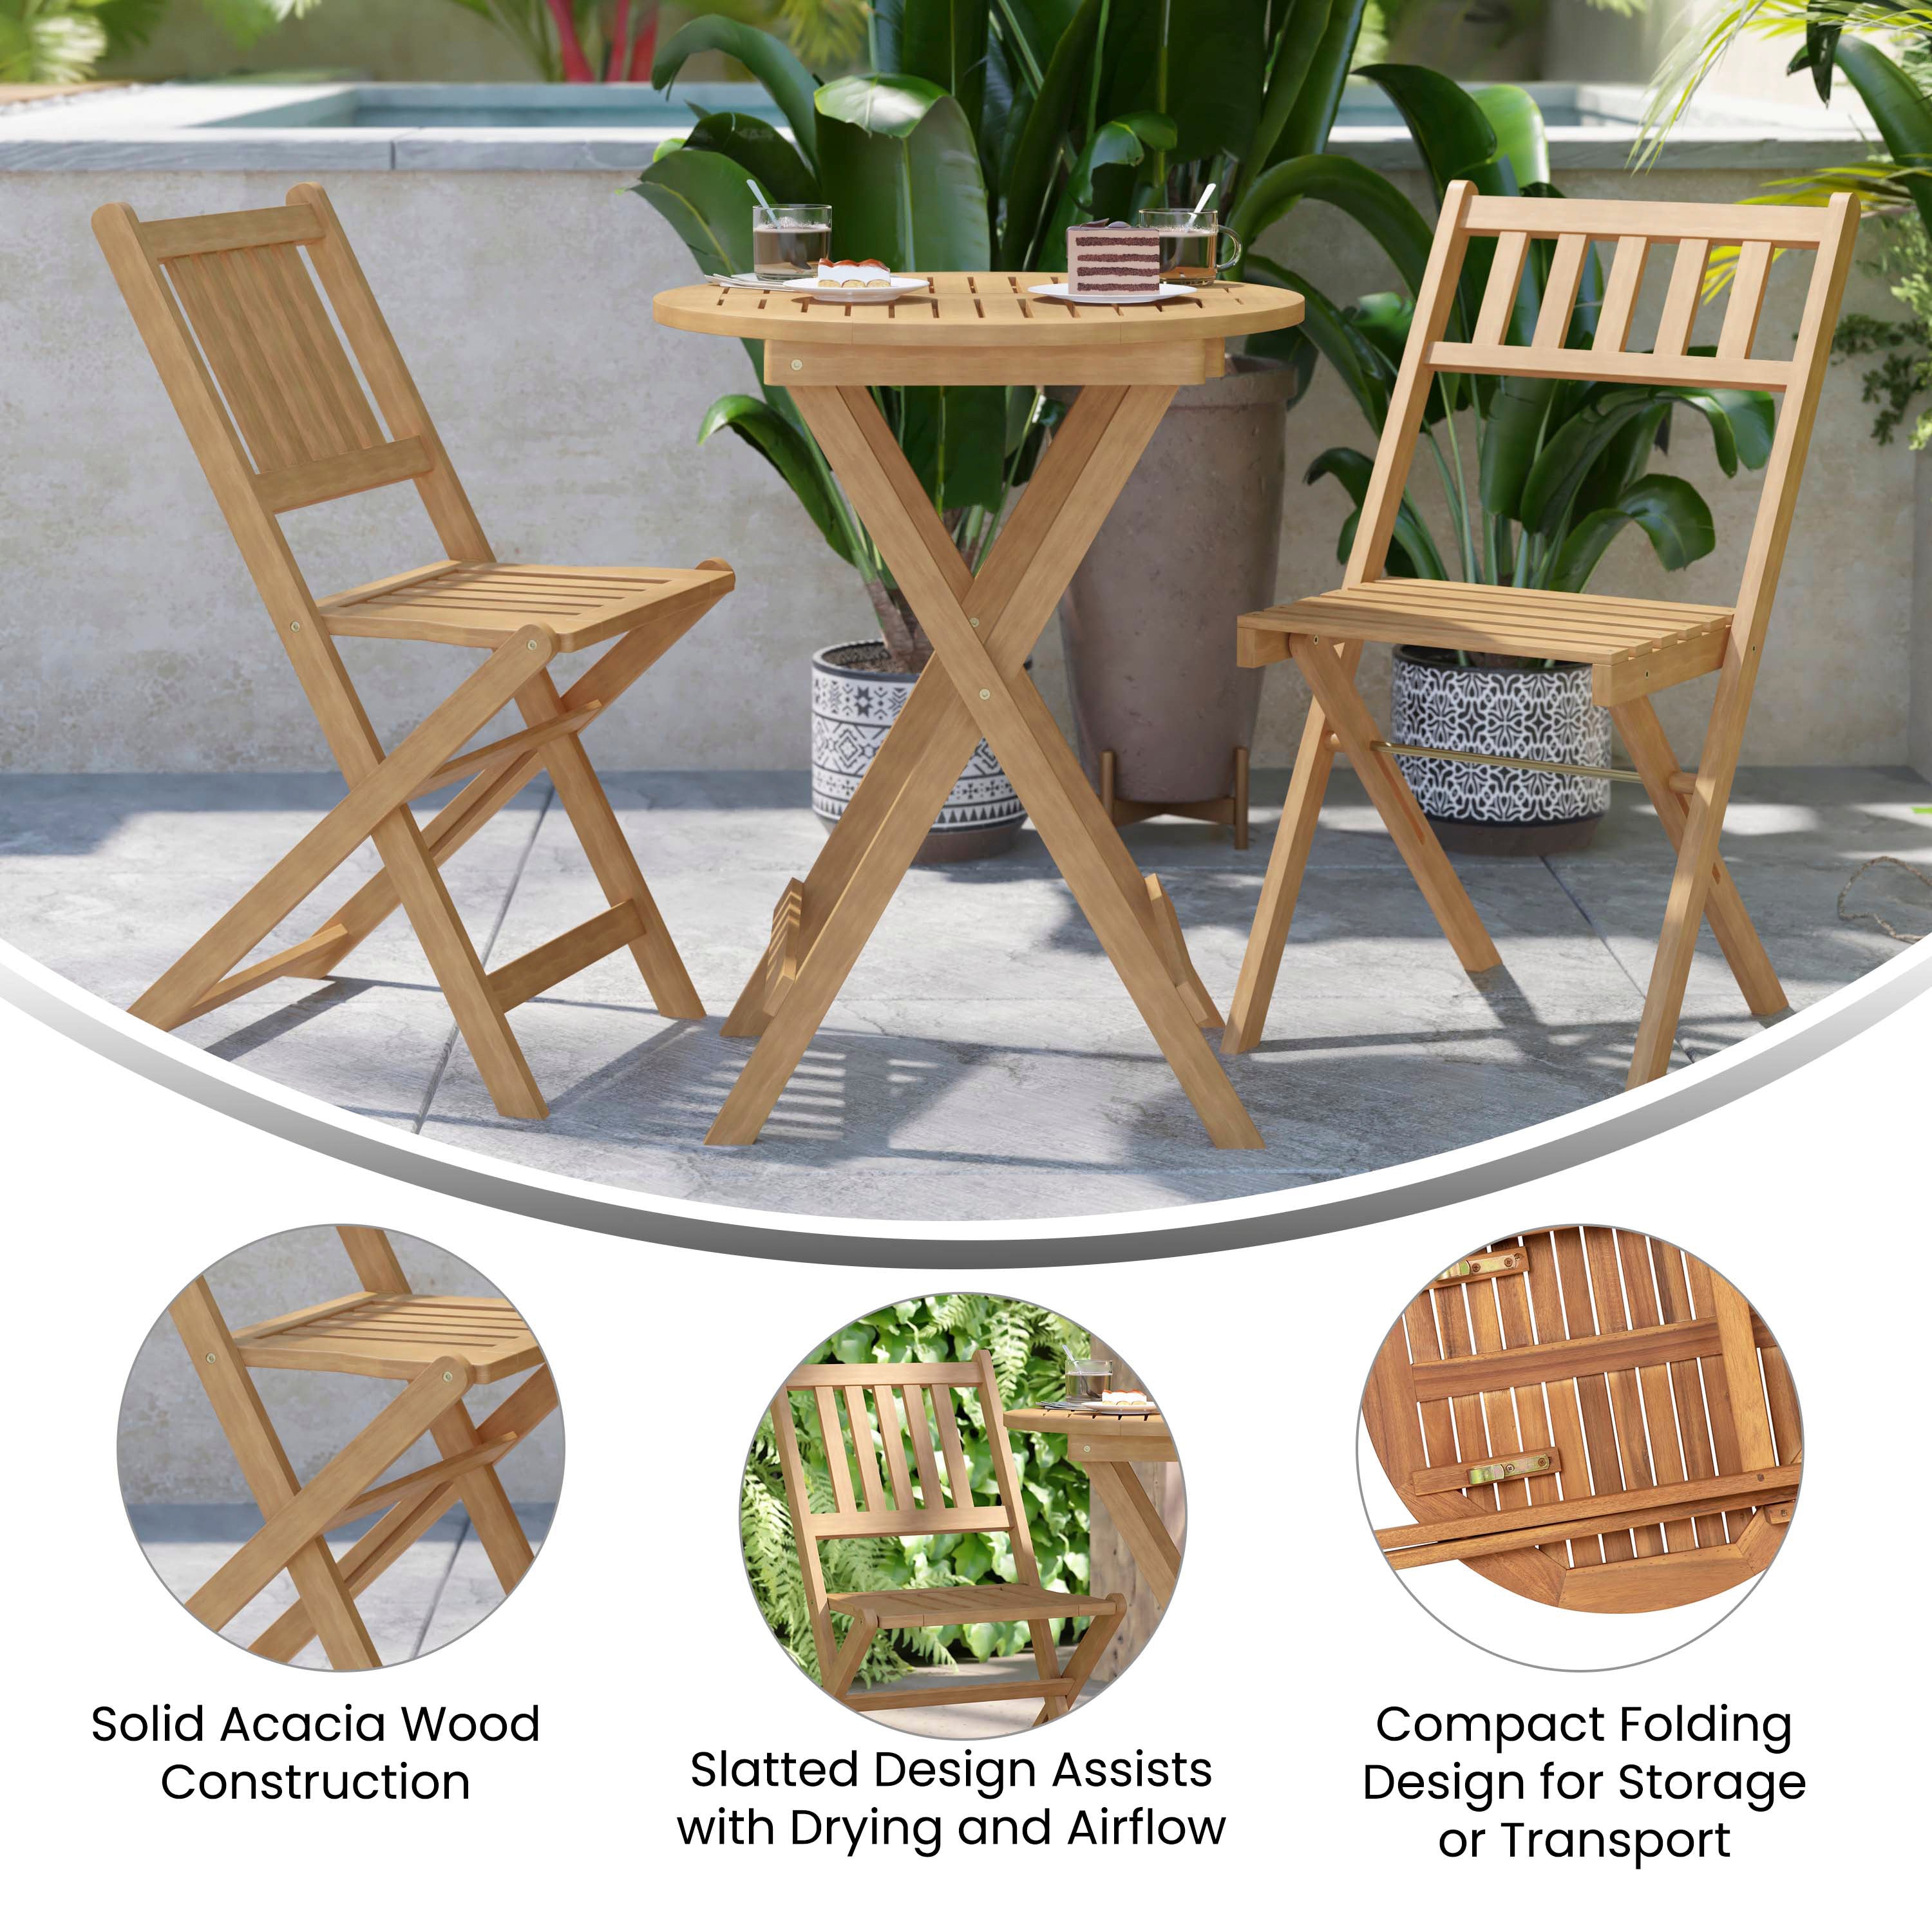 Martindale 3 Piece Folding Patio Bistro Set, Indoor/Outdoor Acacia Wood Table and 2 Chair Set with Slatted Design-Folding Table and Chair Set-Flash Furniture-Wall2Wall Furnishings